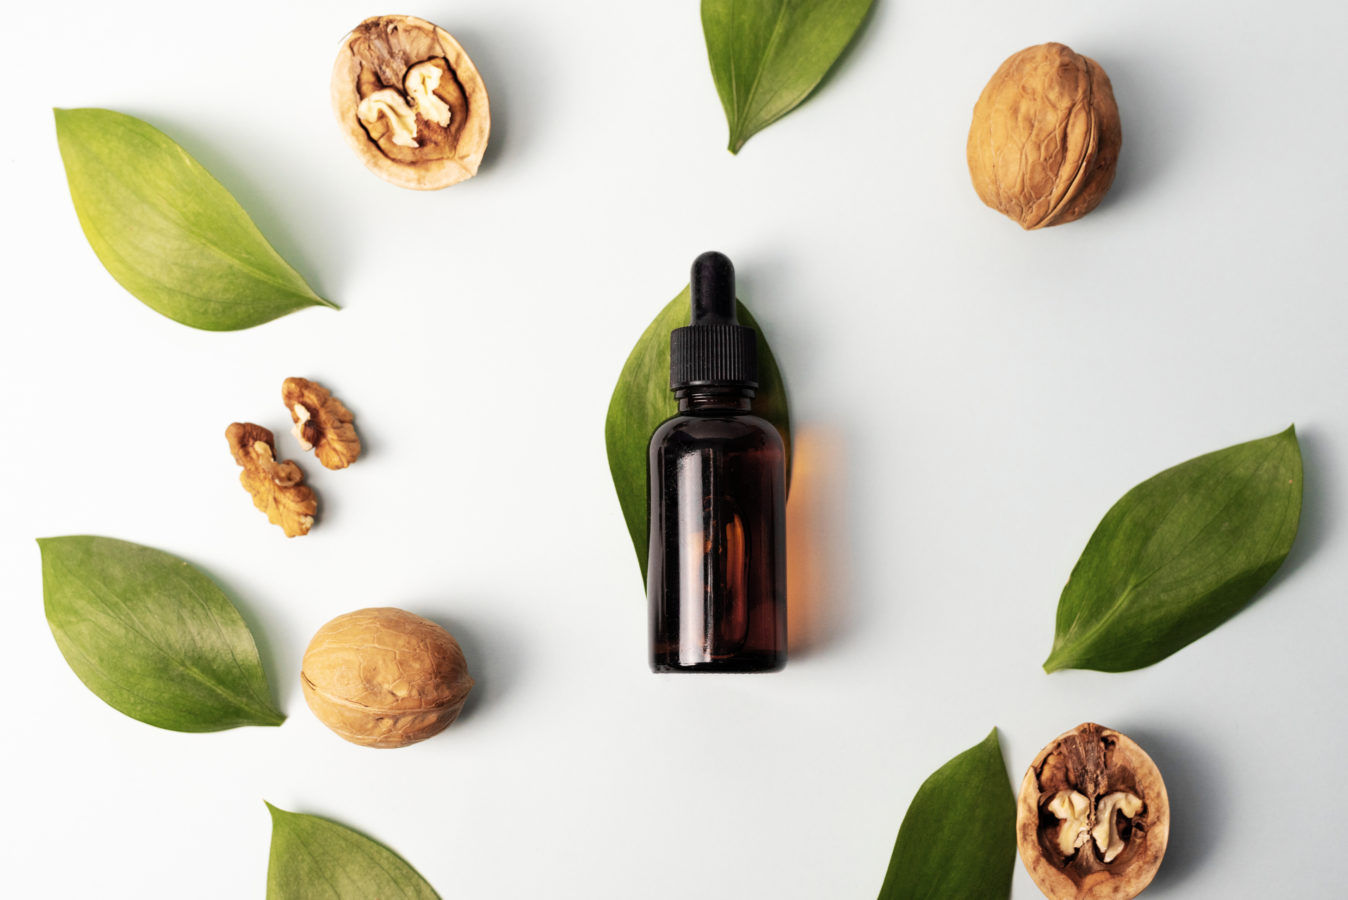 Walnut oil is the skincare elixir you didn’t know you needed (plus, best buys)